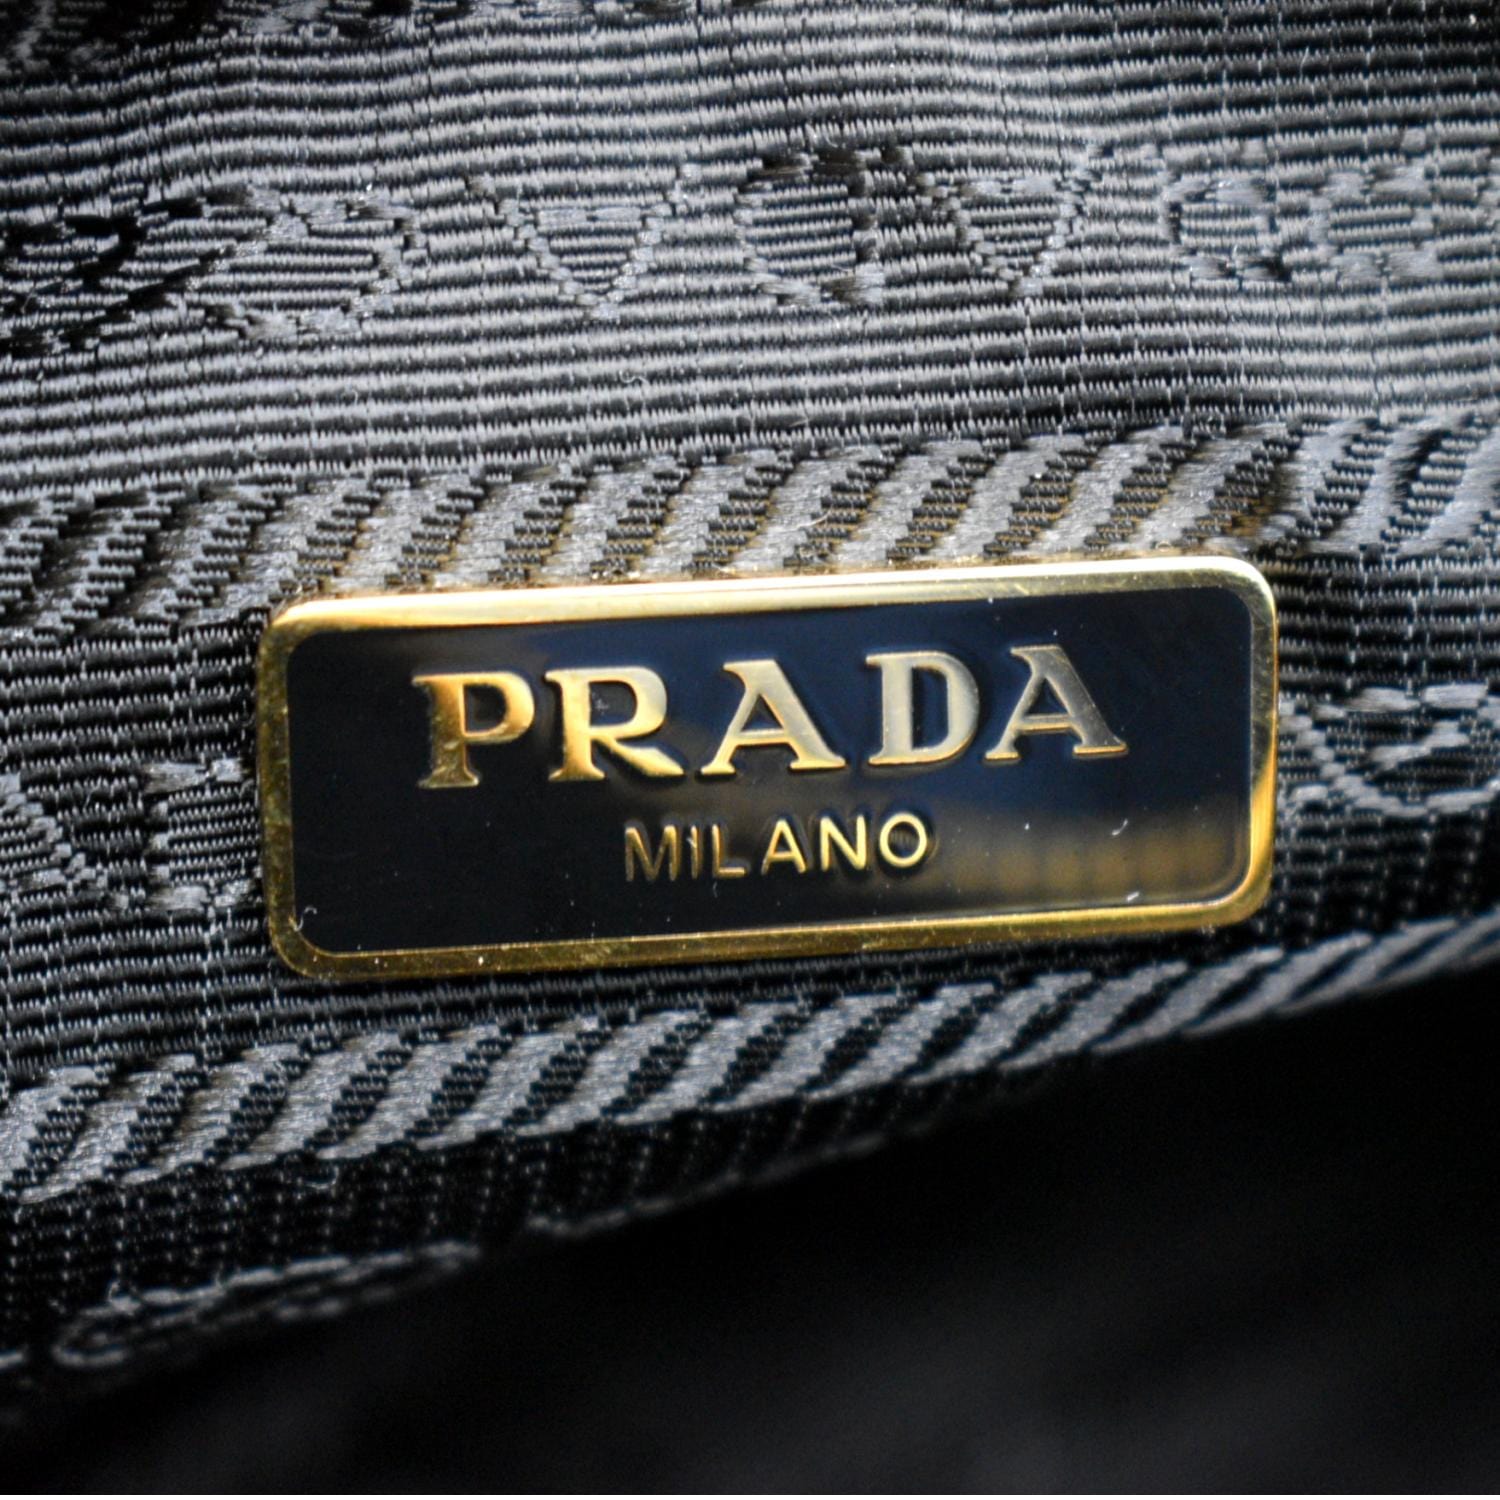 Re-edition leather clutch bag Prada Black in Leather - 34351587